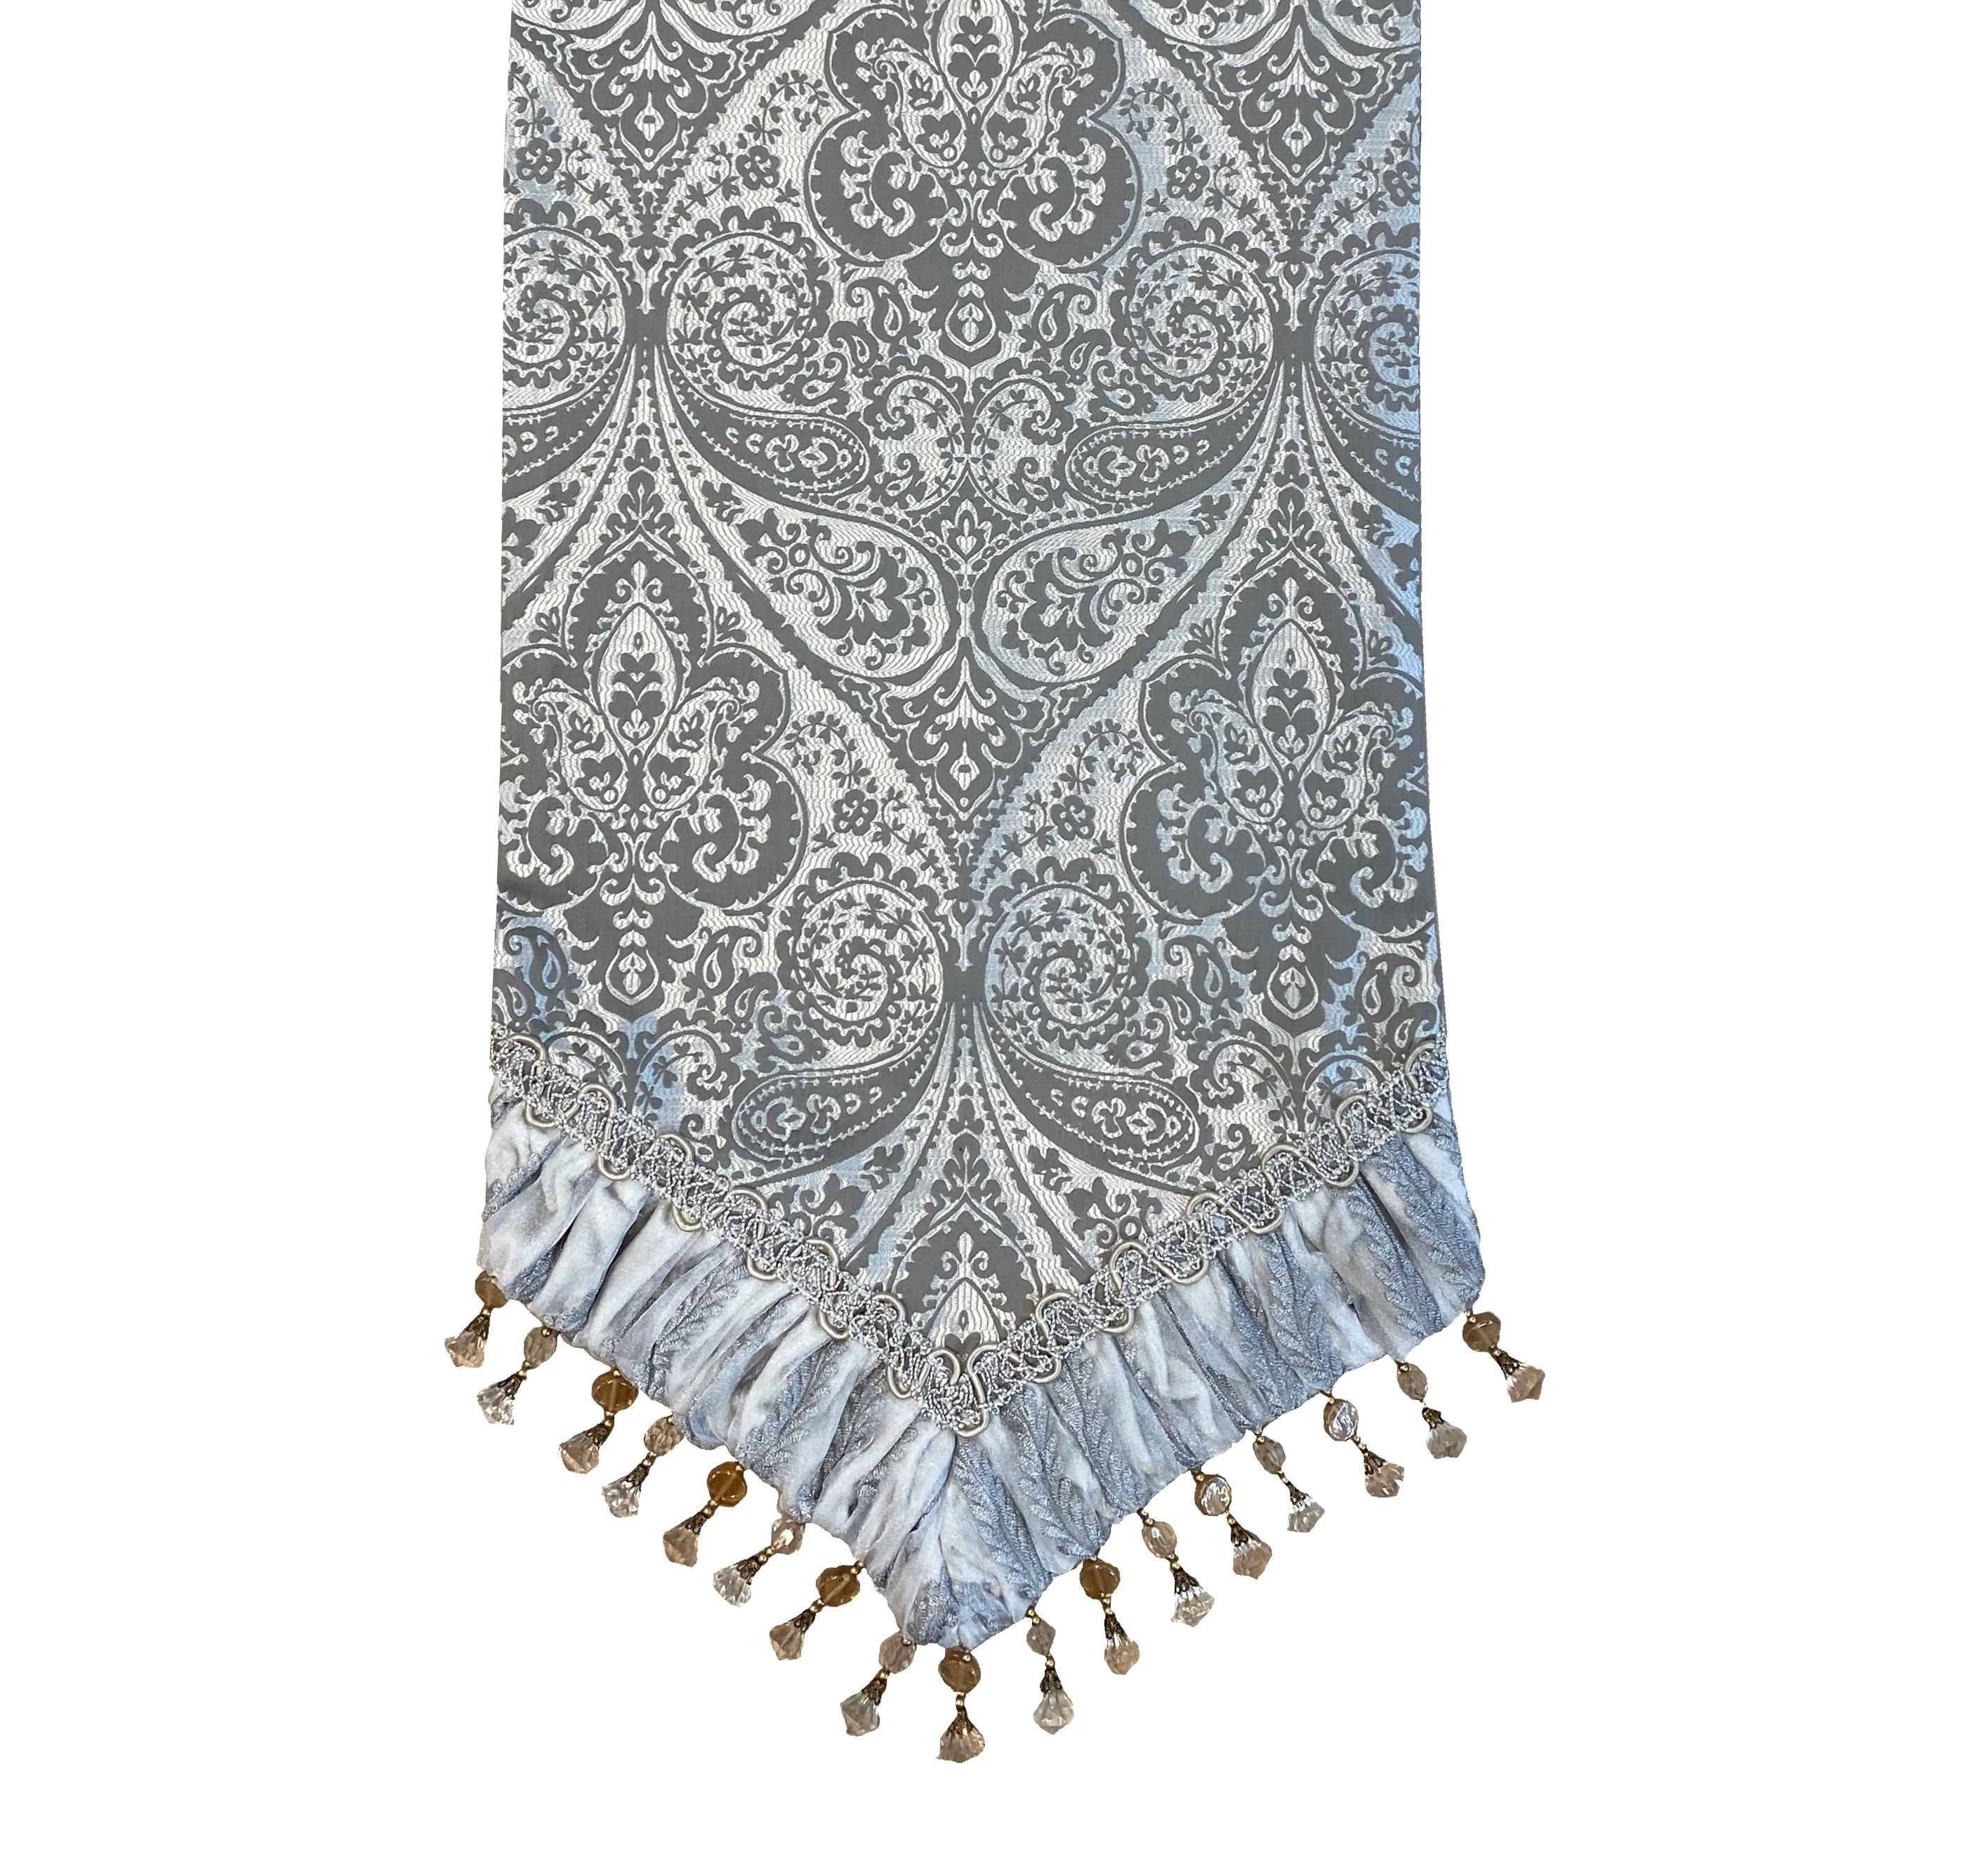 Empress Small Decorative Table Runner